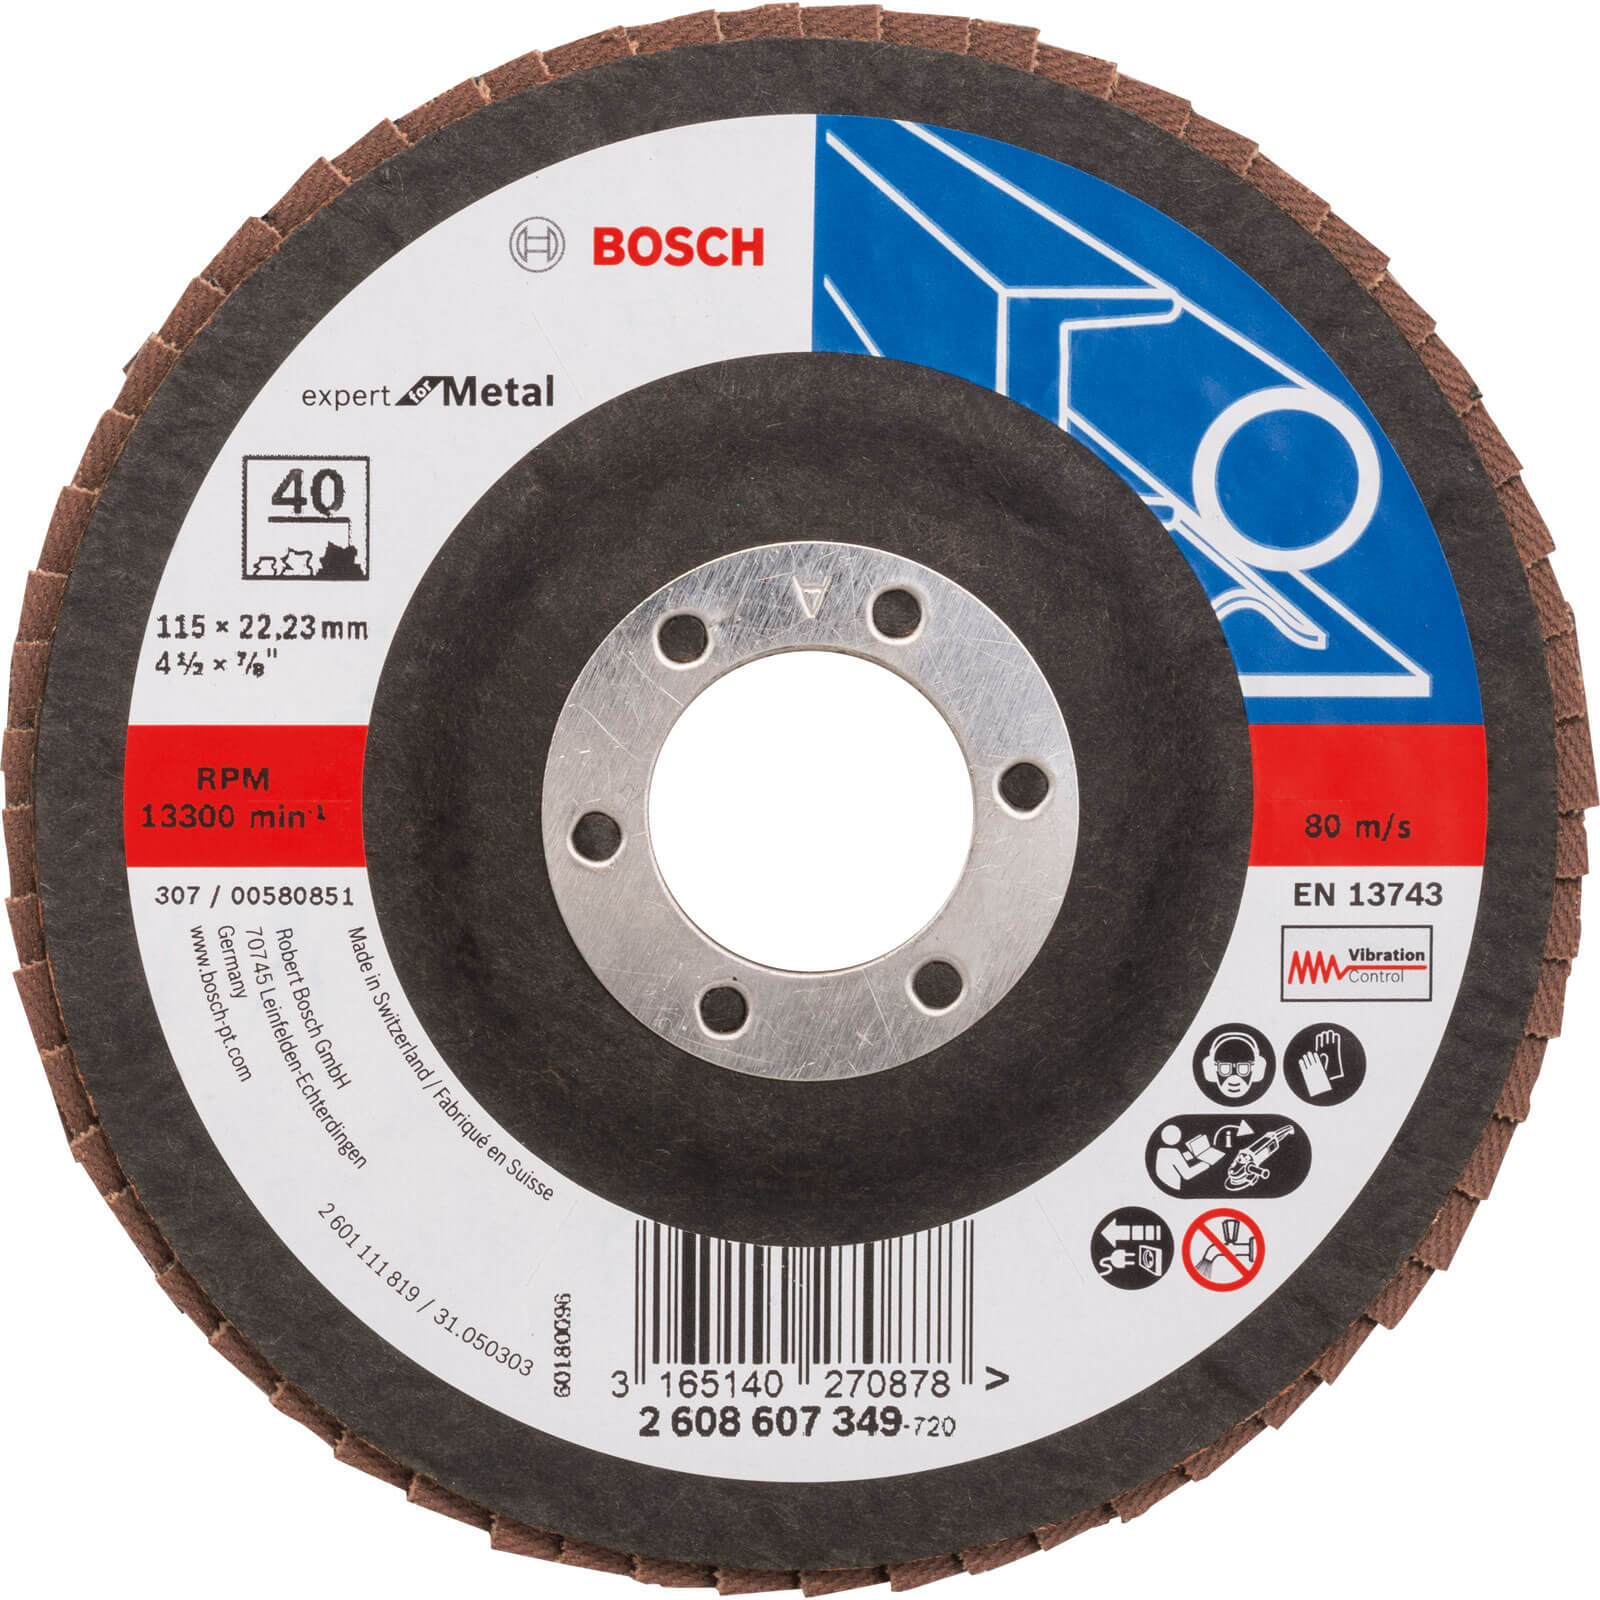 Image of Bosch Expert X551 for Metal Flap Disc 115mm 40g Pack of 1